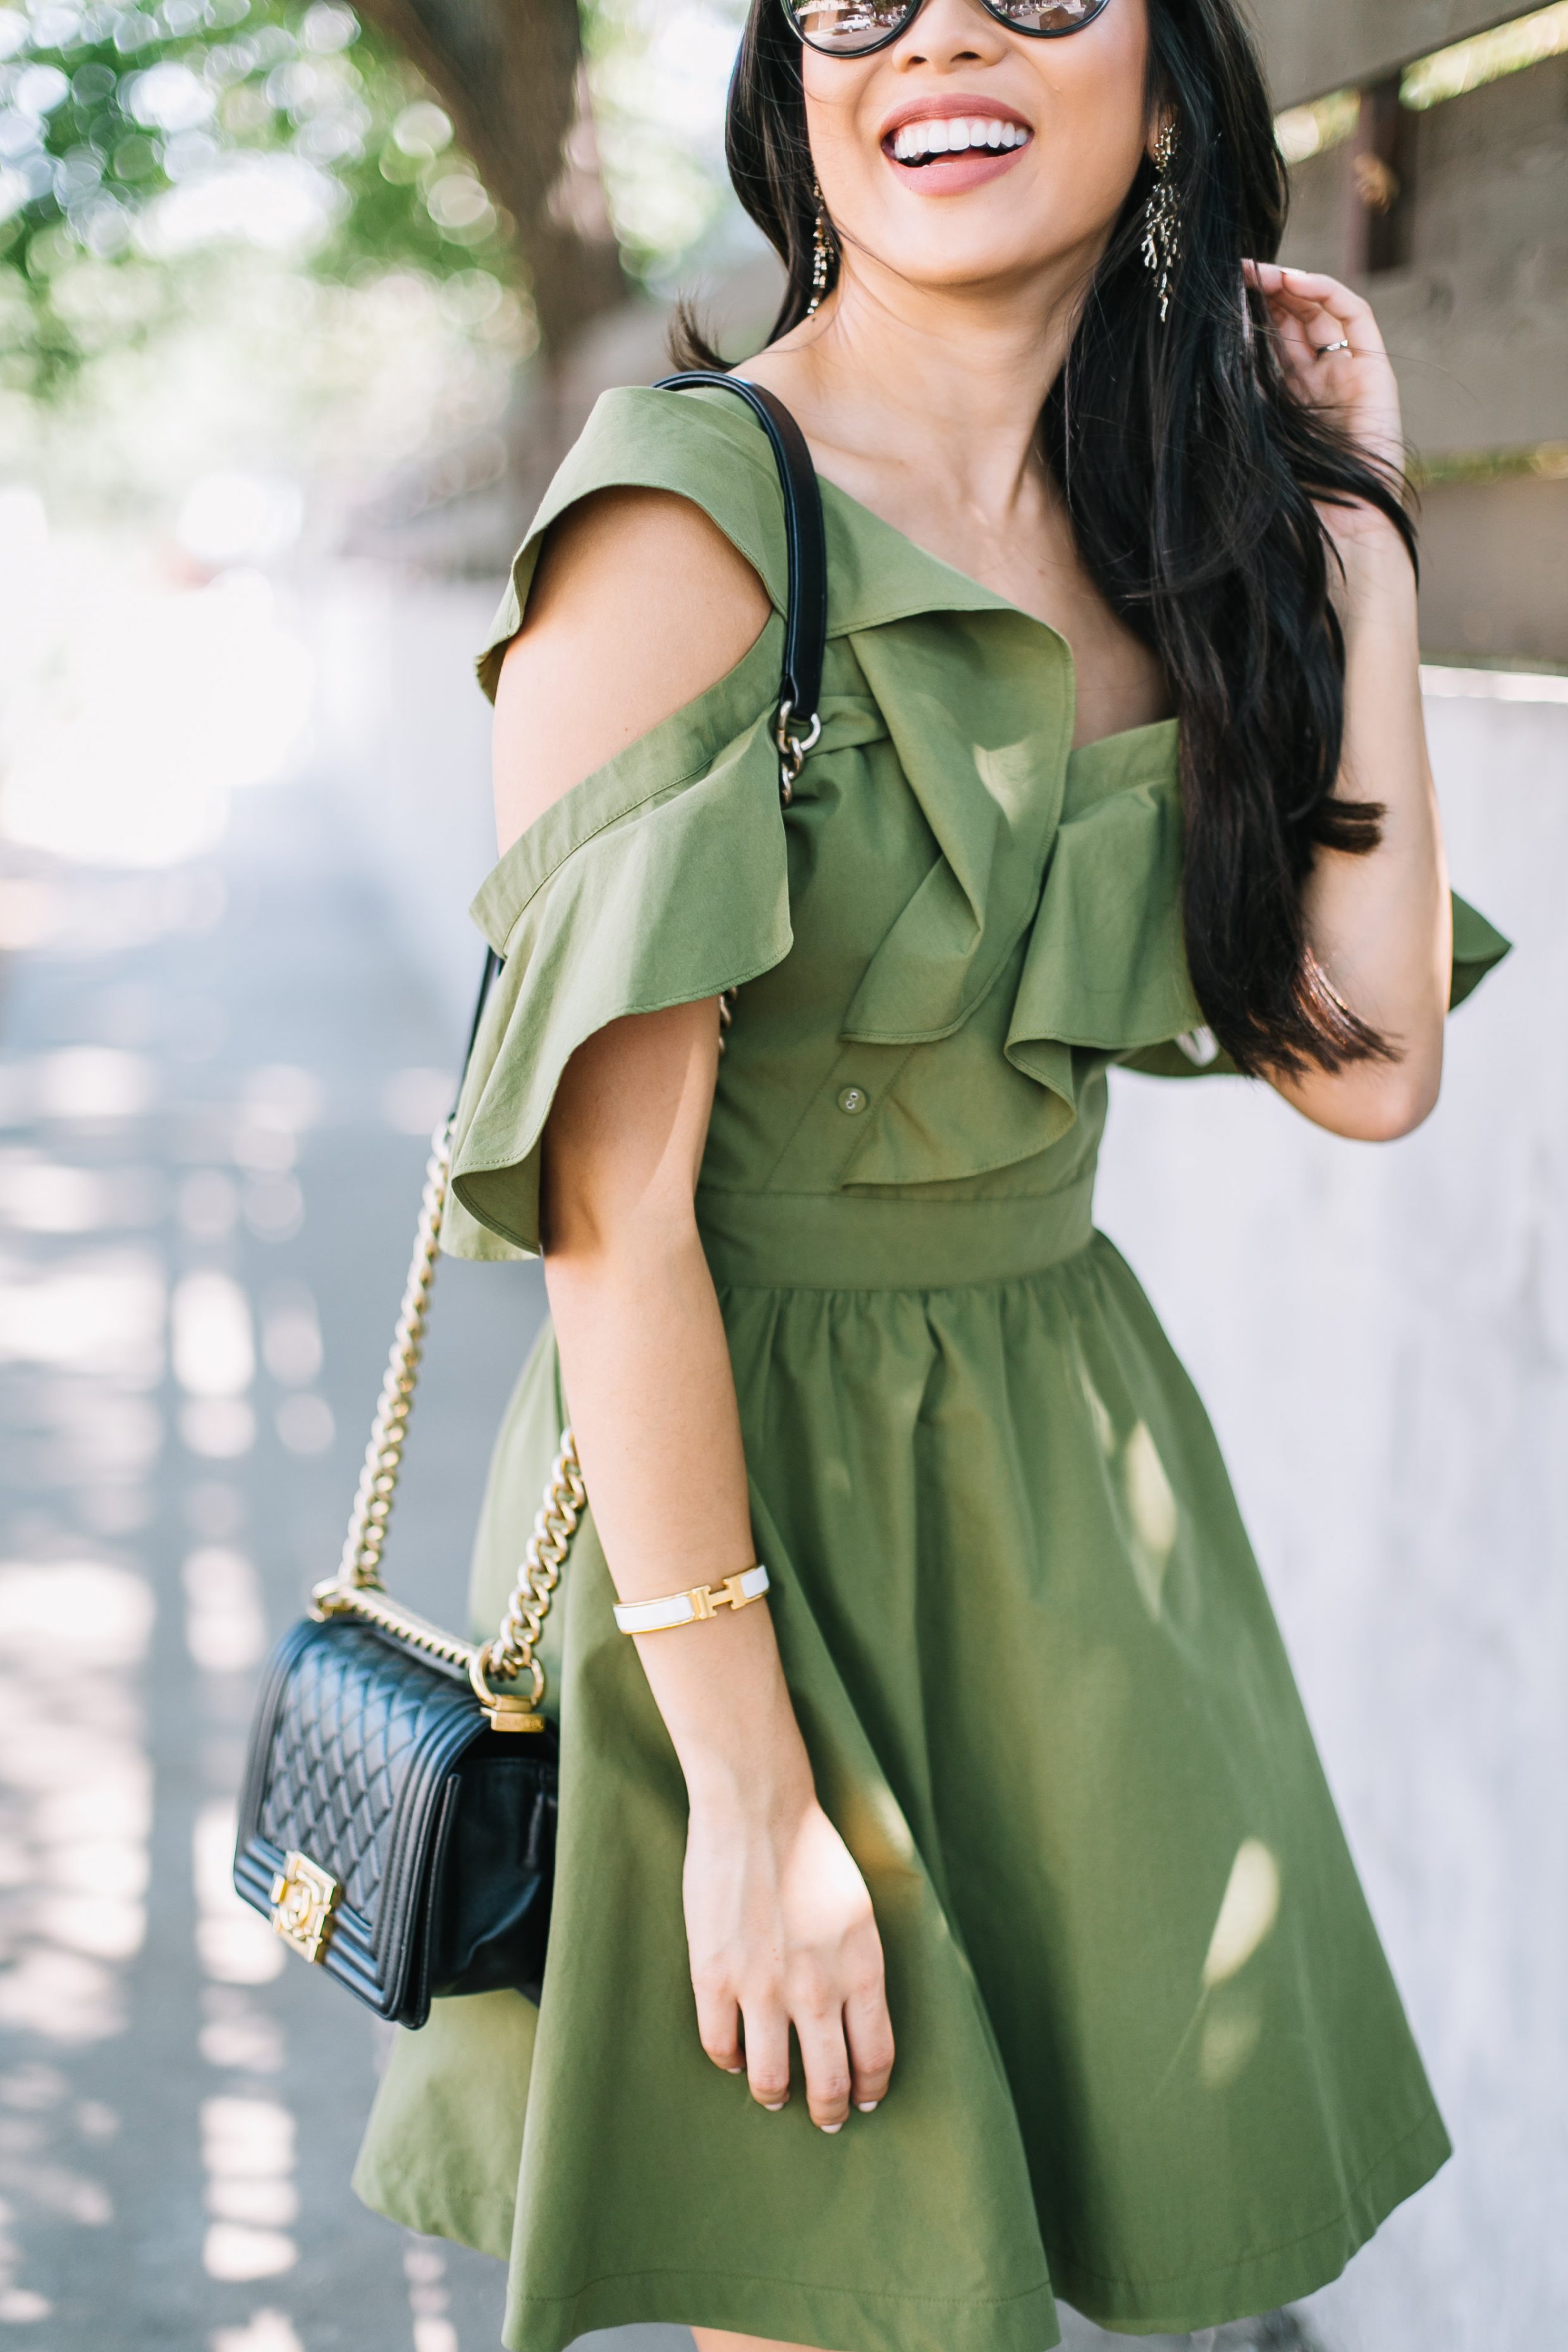 COLOR & CHIC | How to wear fall tones when it's hot outside